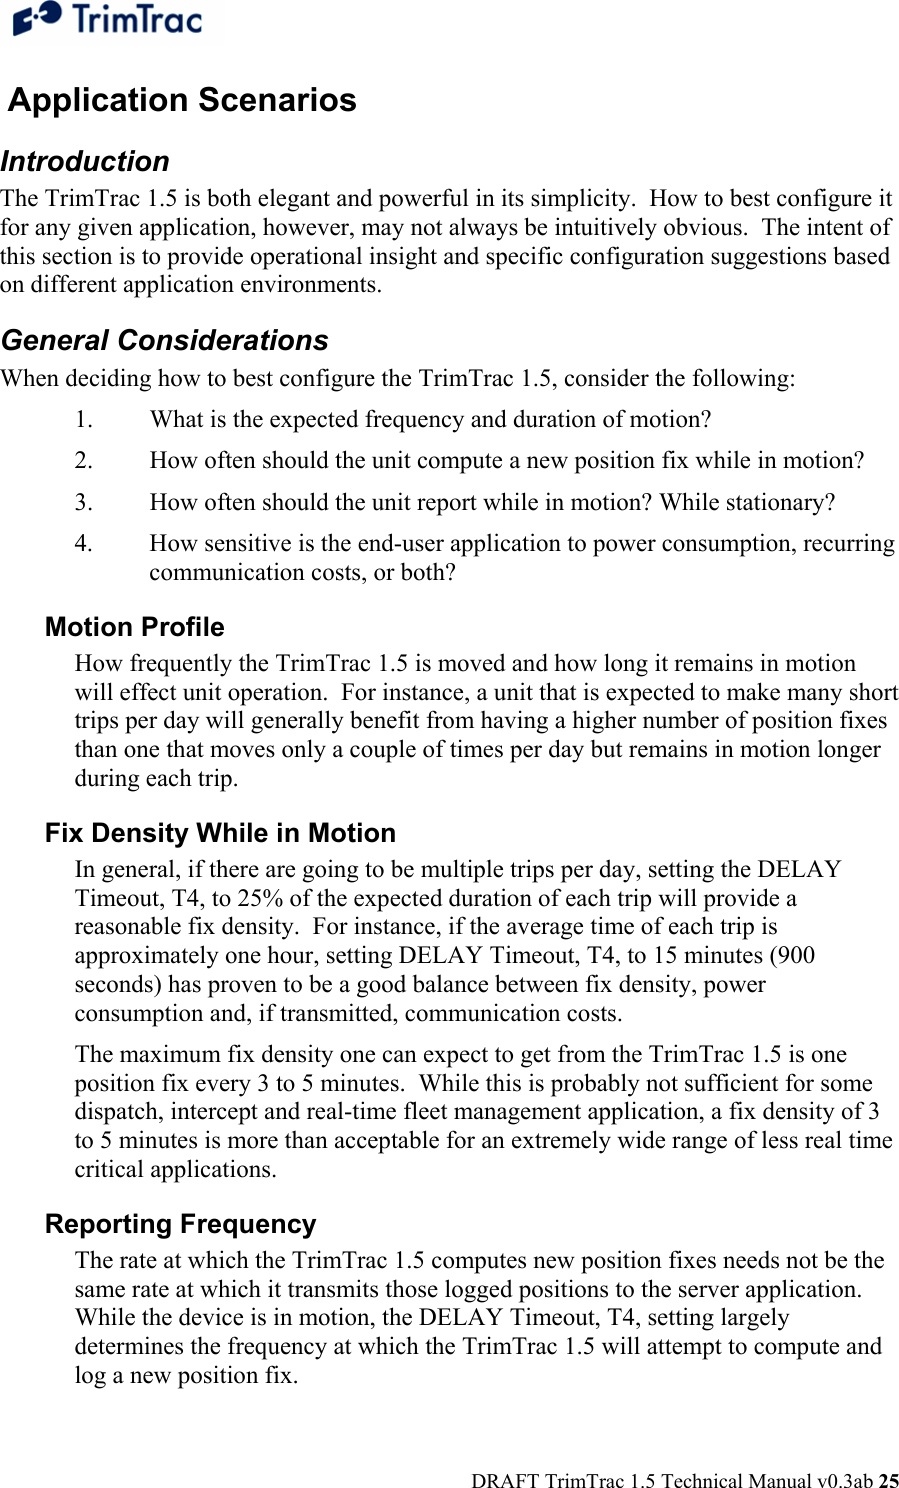  DRAFT TrimTrac 1.5 Technical Manual v0.3ab 25  Application Scenarios Introduction The TrimTrac 1.5 is both elegant and powerful in its simplicity.  How to best configure it for any given application, however, may not always be intuitively obvious.  The intent of this section is to provide operational insight and specific configuration suggestions based on different application environments. General Considerations When deciding how to best configure the TrimTrac 1.5, consider the following: 1.  What is the expected frequency and duration of motion? 2.  How often should the unit compute a new position fix while in motion? 3.  How often should the unit report while in motion? While stationary? 4.  How sensitive is the end-user application to power consumption, recurring communication costs, or both? Motion Profile How frequently the TrimTrac 1.5 is moved and how long it remains in motion will effect unit operation.  For instance, a unit that is expected to make many short trips per day will generally benefit from having a higher number of position fixes than one that moves only a couple of times per day but remains in motion longer during each trip. Fix Density While in Motion In general, if there are going to be multiple trips per day, setting the DELAY Timeout, T4, to 25% of the expected duration of each trip will provide a reasonable fix density.  For instance, if the average time of each trip is approximately one hour, setting DELAY Timeout, T4, to 15 minutes (900 seconds) has proven to be a good balance between fix density, power consumption and, if transmitted, communication costs. The maximum fix density one can expect to get from the TrimTrac 1.5 is one position fix every 3 to 5 minutes.  While this is probably not sufficient for some dispatch, intercept and real-time fleet management application, a fix density of 3 to 5 minutes is more than acceptable for an extremely wide range of less real time critical applications. Reporting Frequency The rate at which the TrimTrac 1.5 computes new position fixes needs not be the same rate at which it transmits those logged positions to the server application.  While the device is in motion, the DELAY Timeout, T4, setting largely determines the frequency at which the TrimTrac 1.5 will attempt to compute and log a new position fix.   